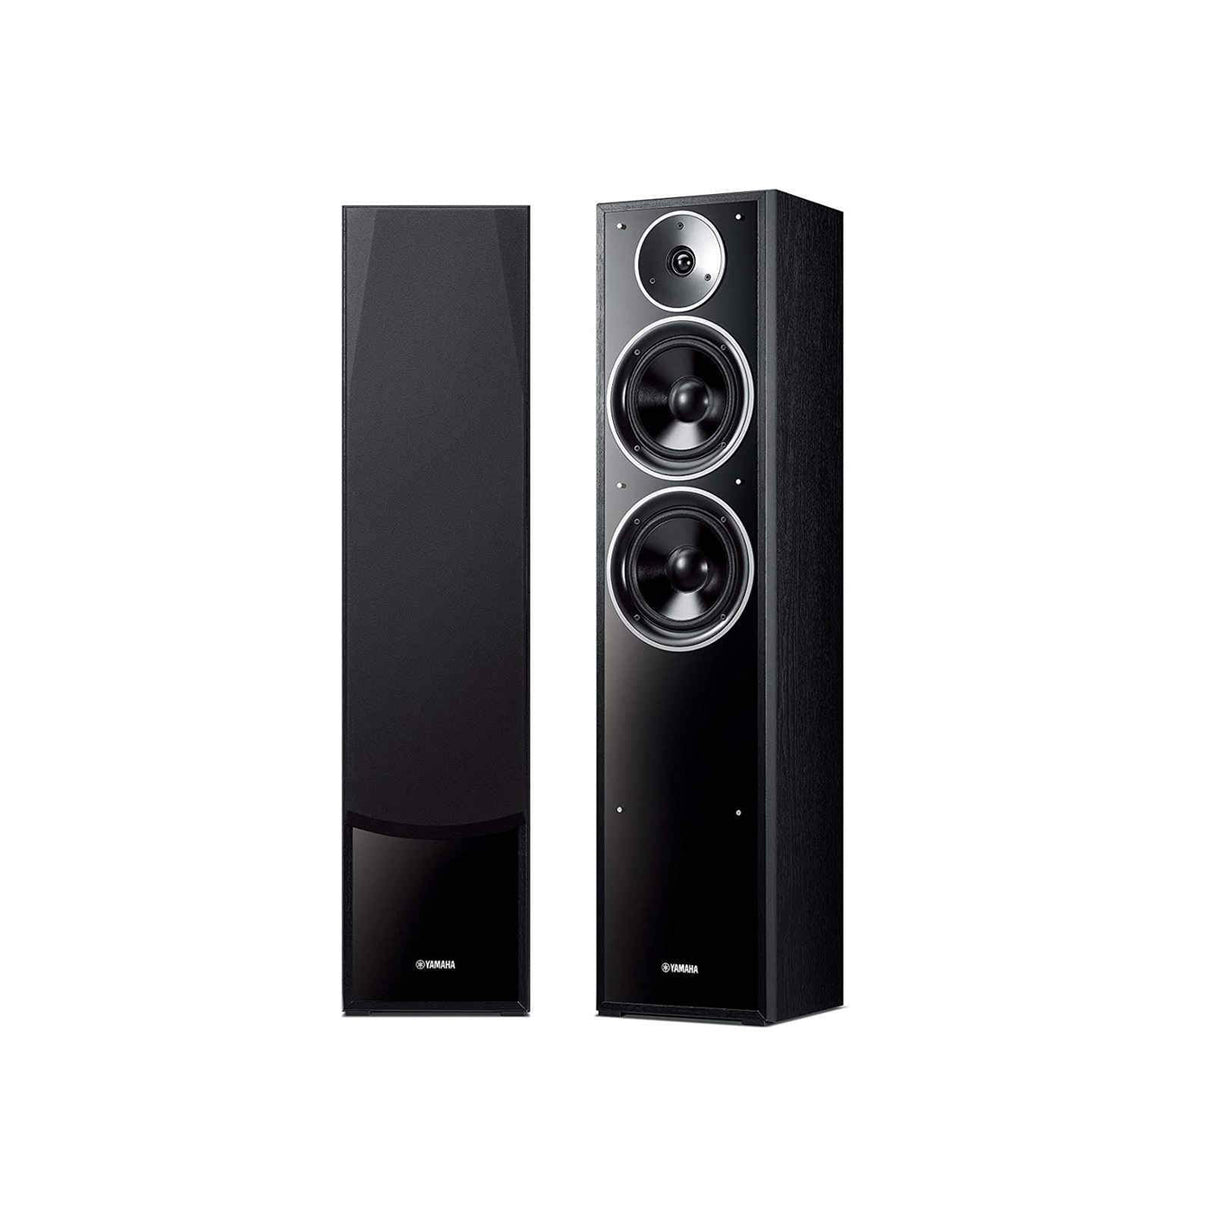 Yamaha RS-202 Stereo Receiver + Yamaha NS-F71 Floor Standing Speakers (Stereo Bundle Pack)